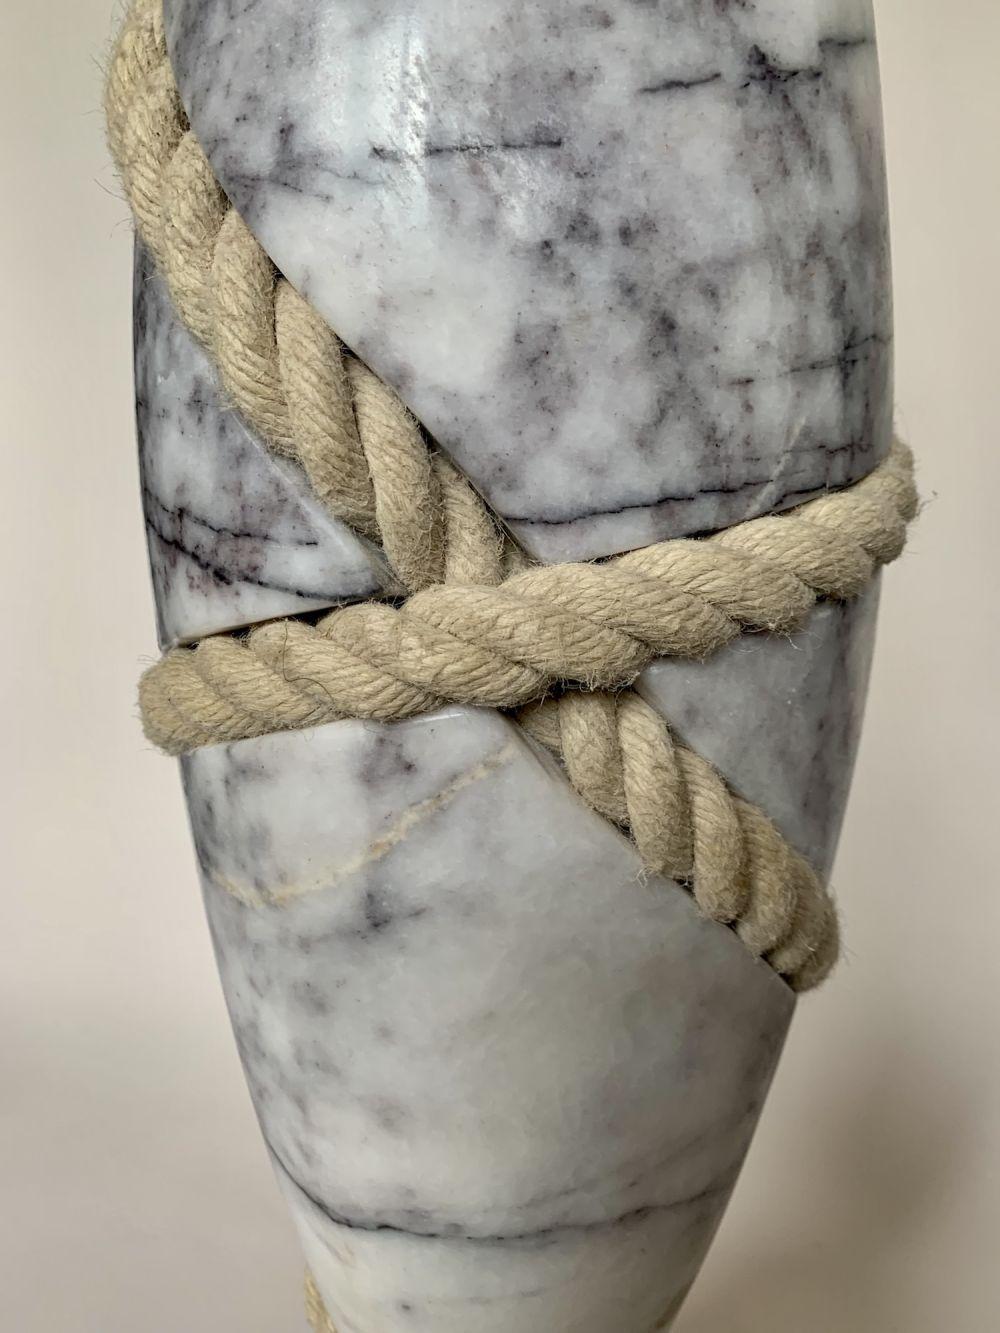 Lilac marble, oak, rope. Dimensions : 74 cm × 20 cm × 16 cm
Unique work delivered with a certificate of authenticity. 
Peter Brooke-Ball's works surprise with their humour, simplicity and sensuality. As he himself states, the desire is to create